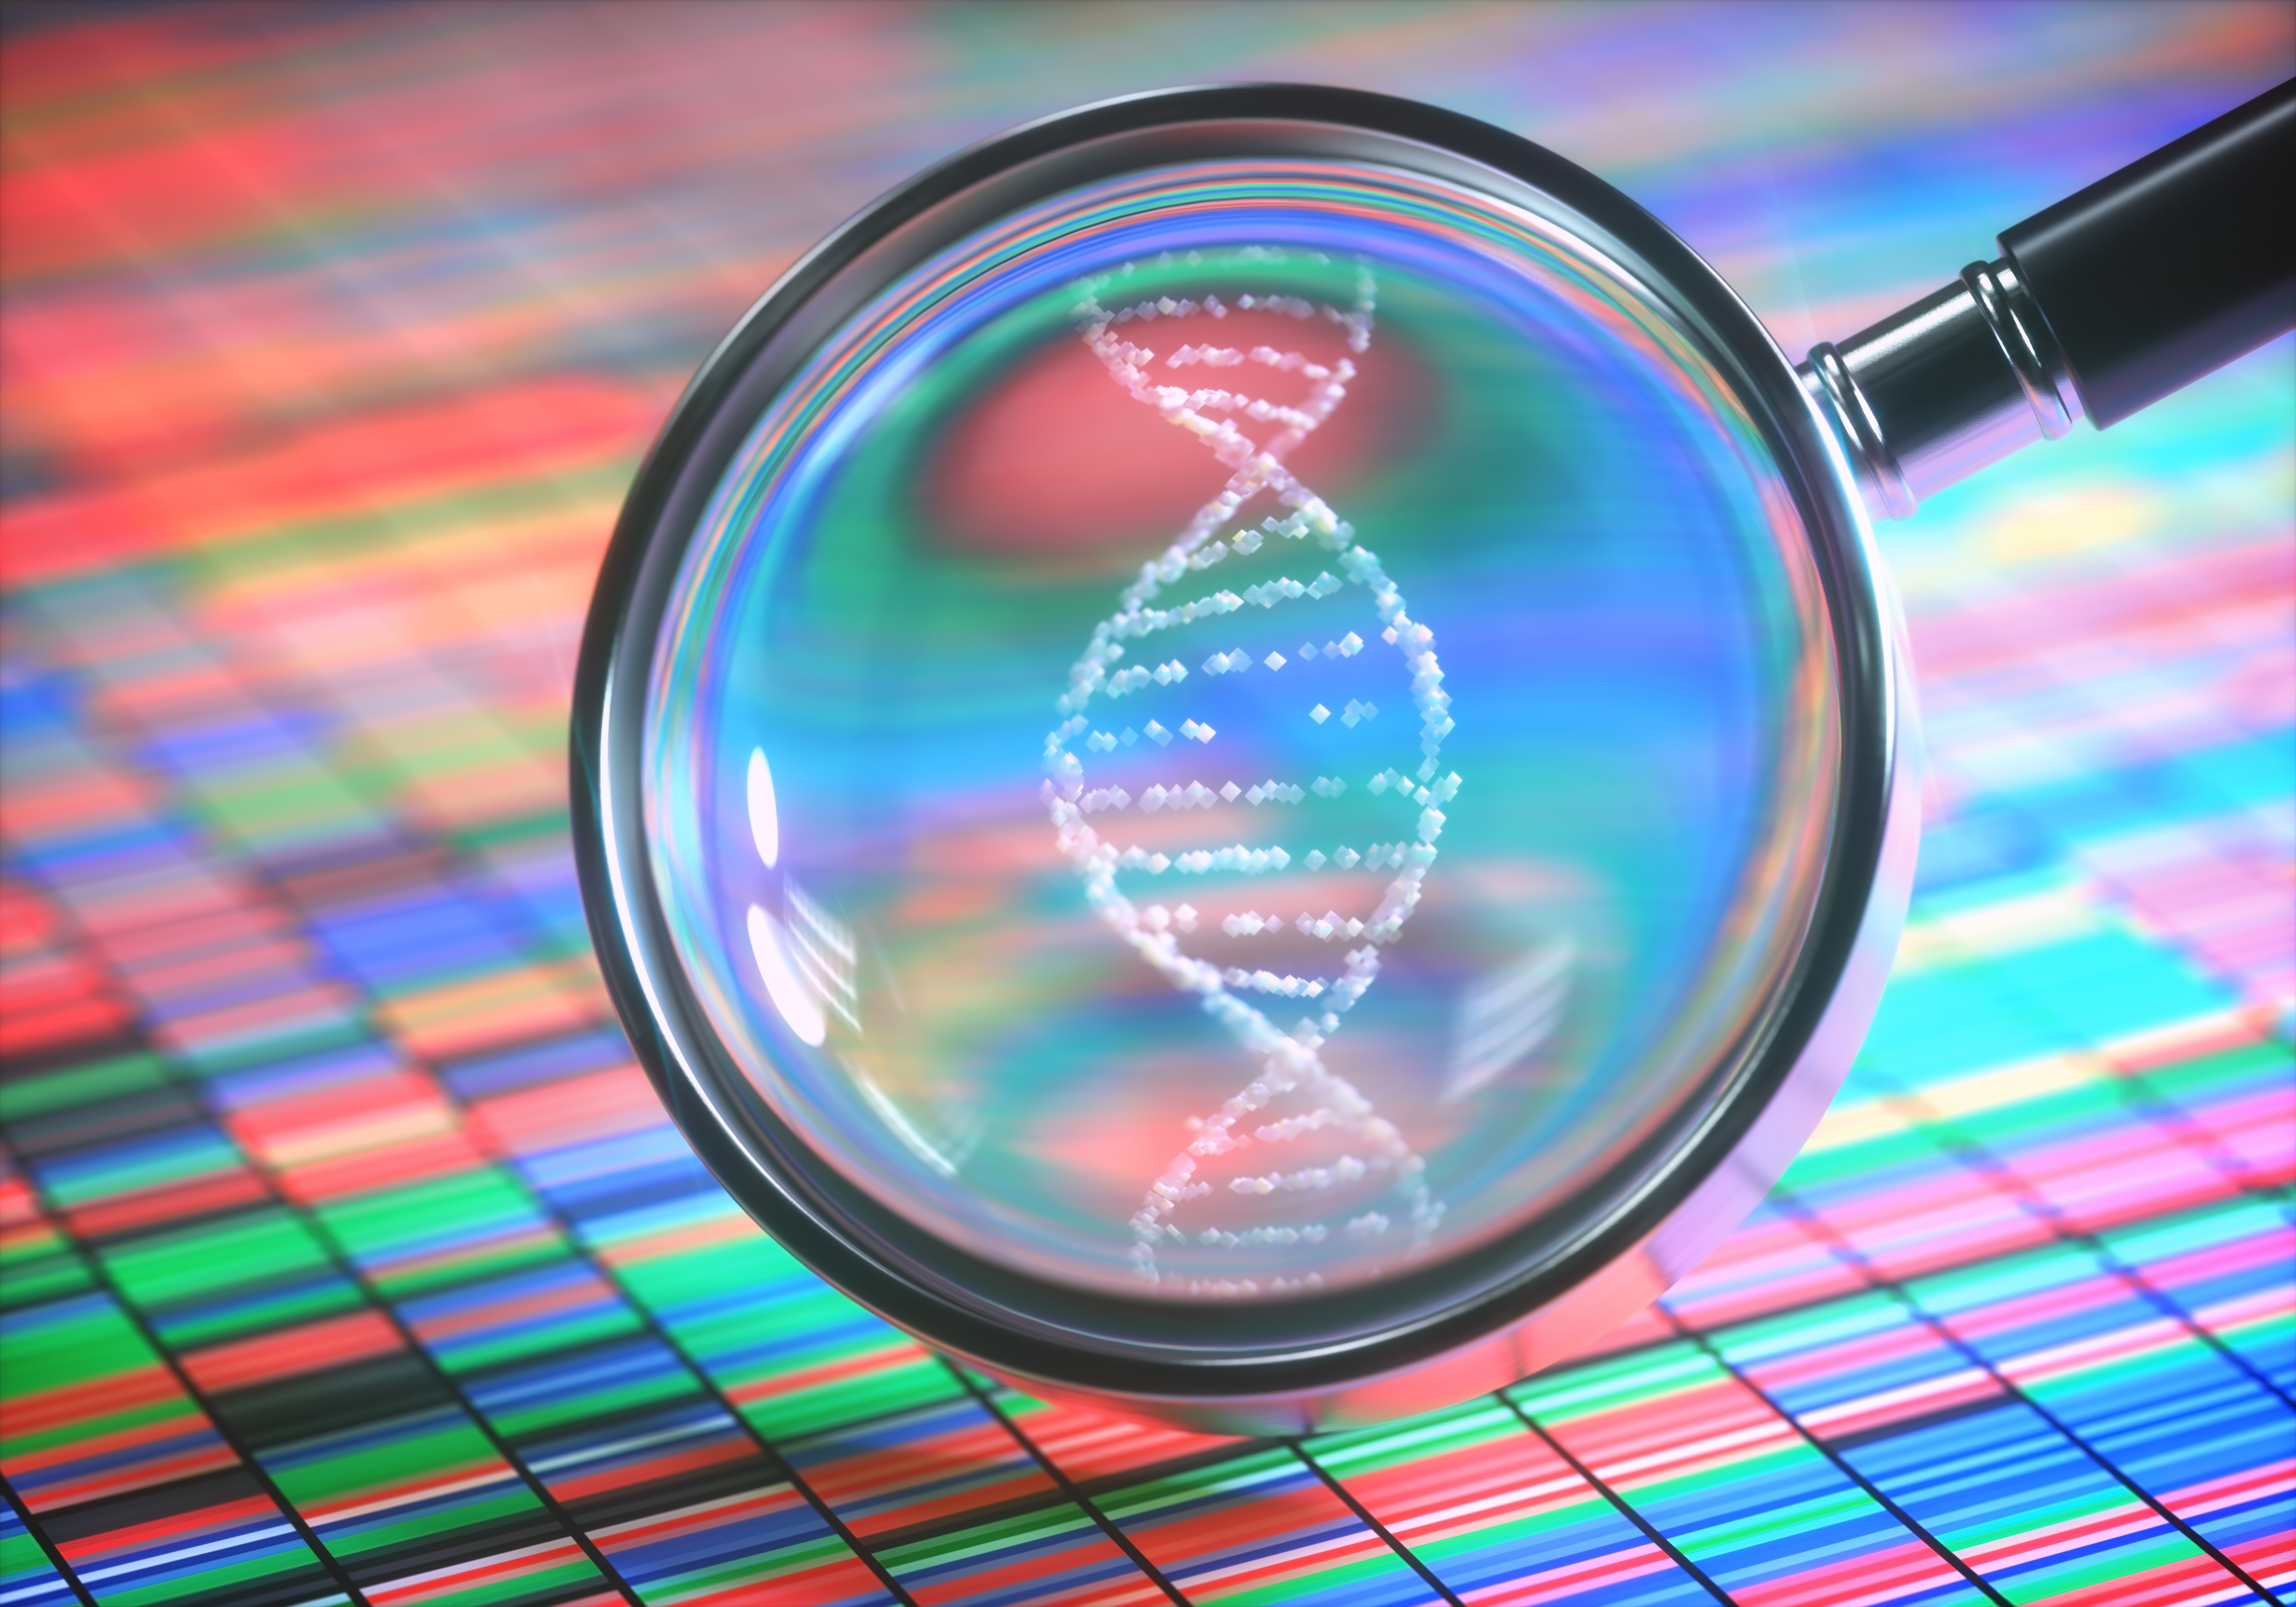 AdobeStock_188814004_DNA Sanger Sequencing and a Magnifying Glass Showing the DNA Helix.